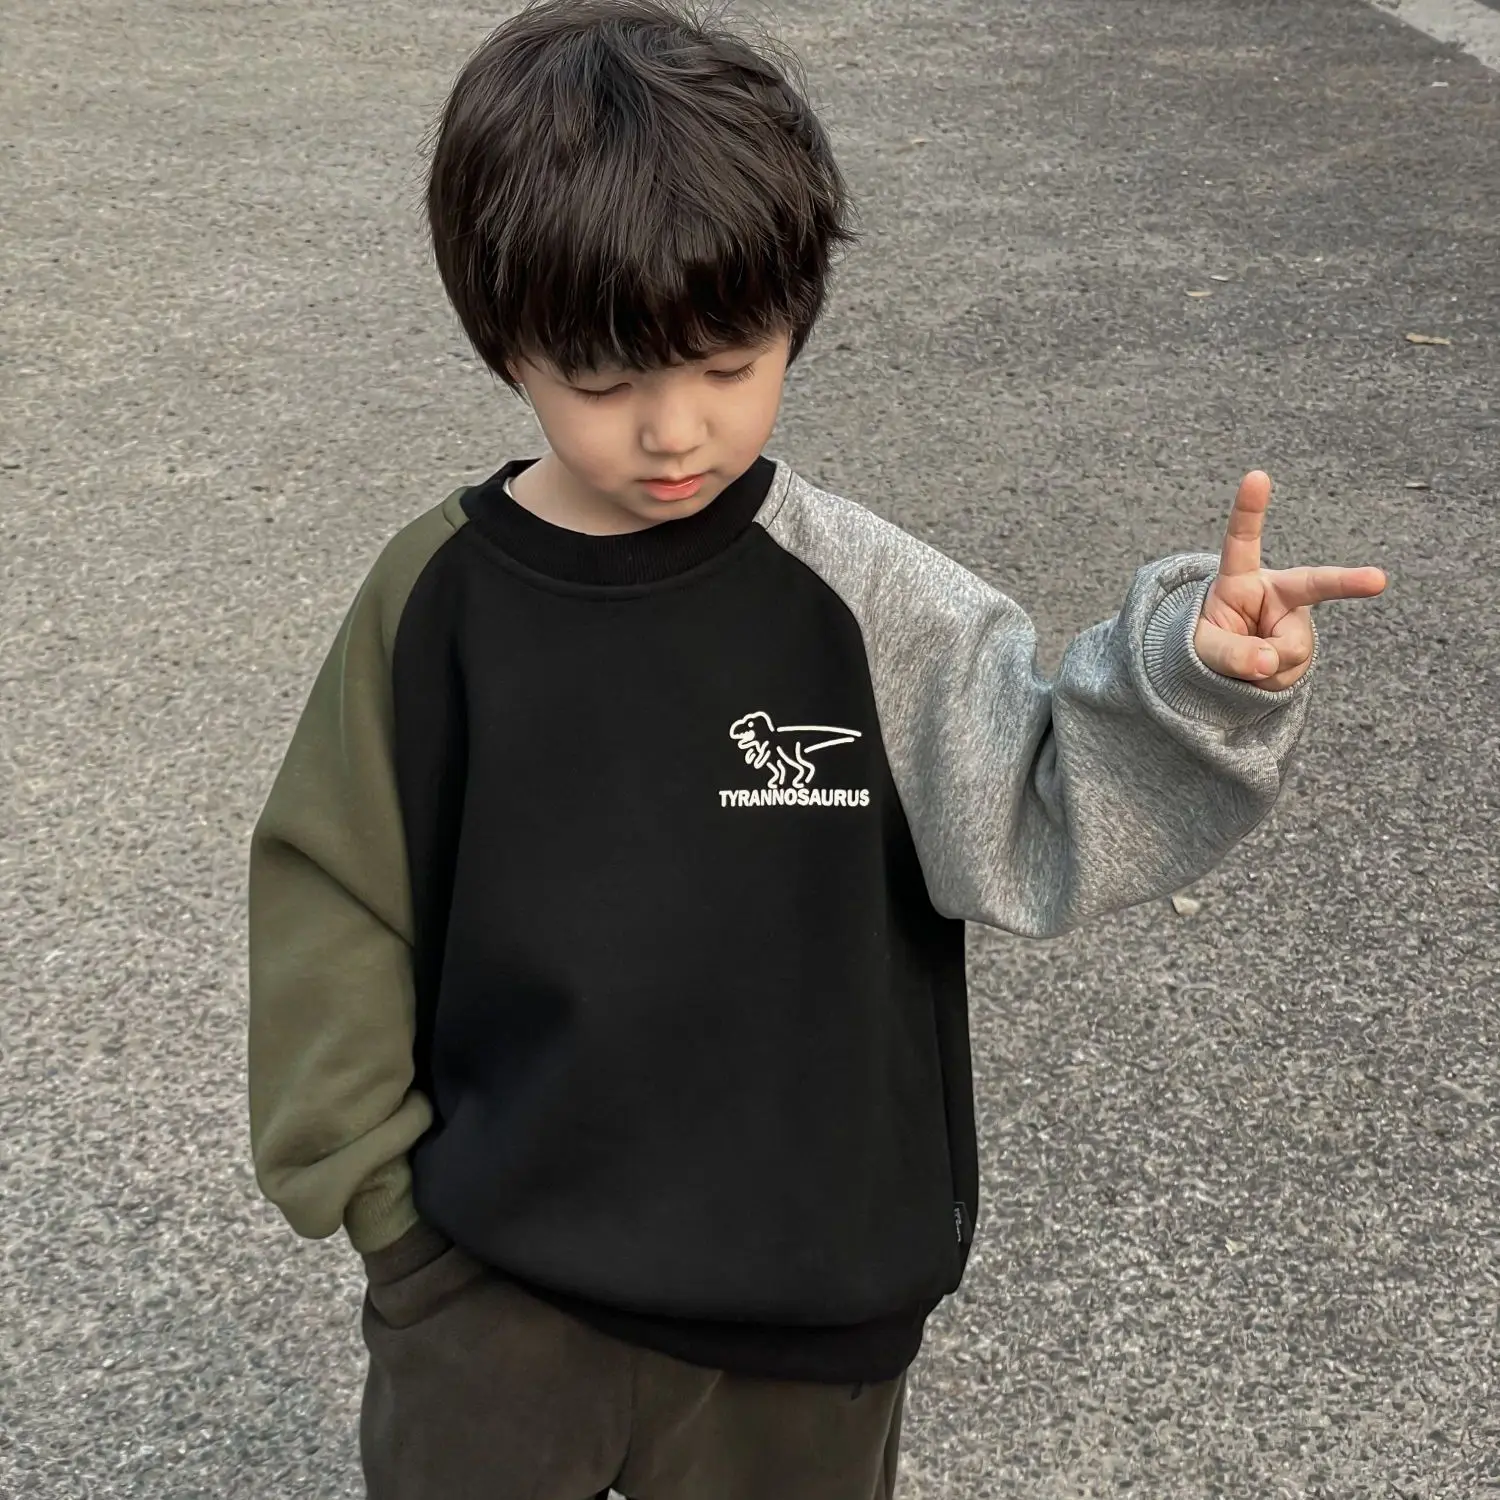 2022 Boys' Clothing New Winter Sweatshirt Plush Warm Hooded Pullover Children's Clothing Color Contrast Top Korean Style